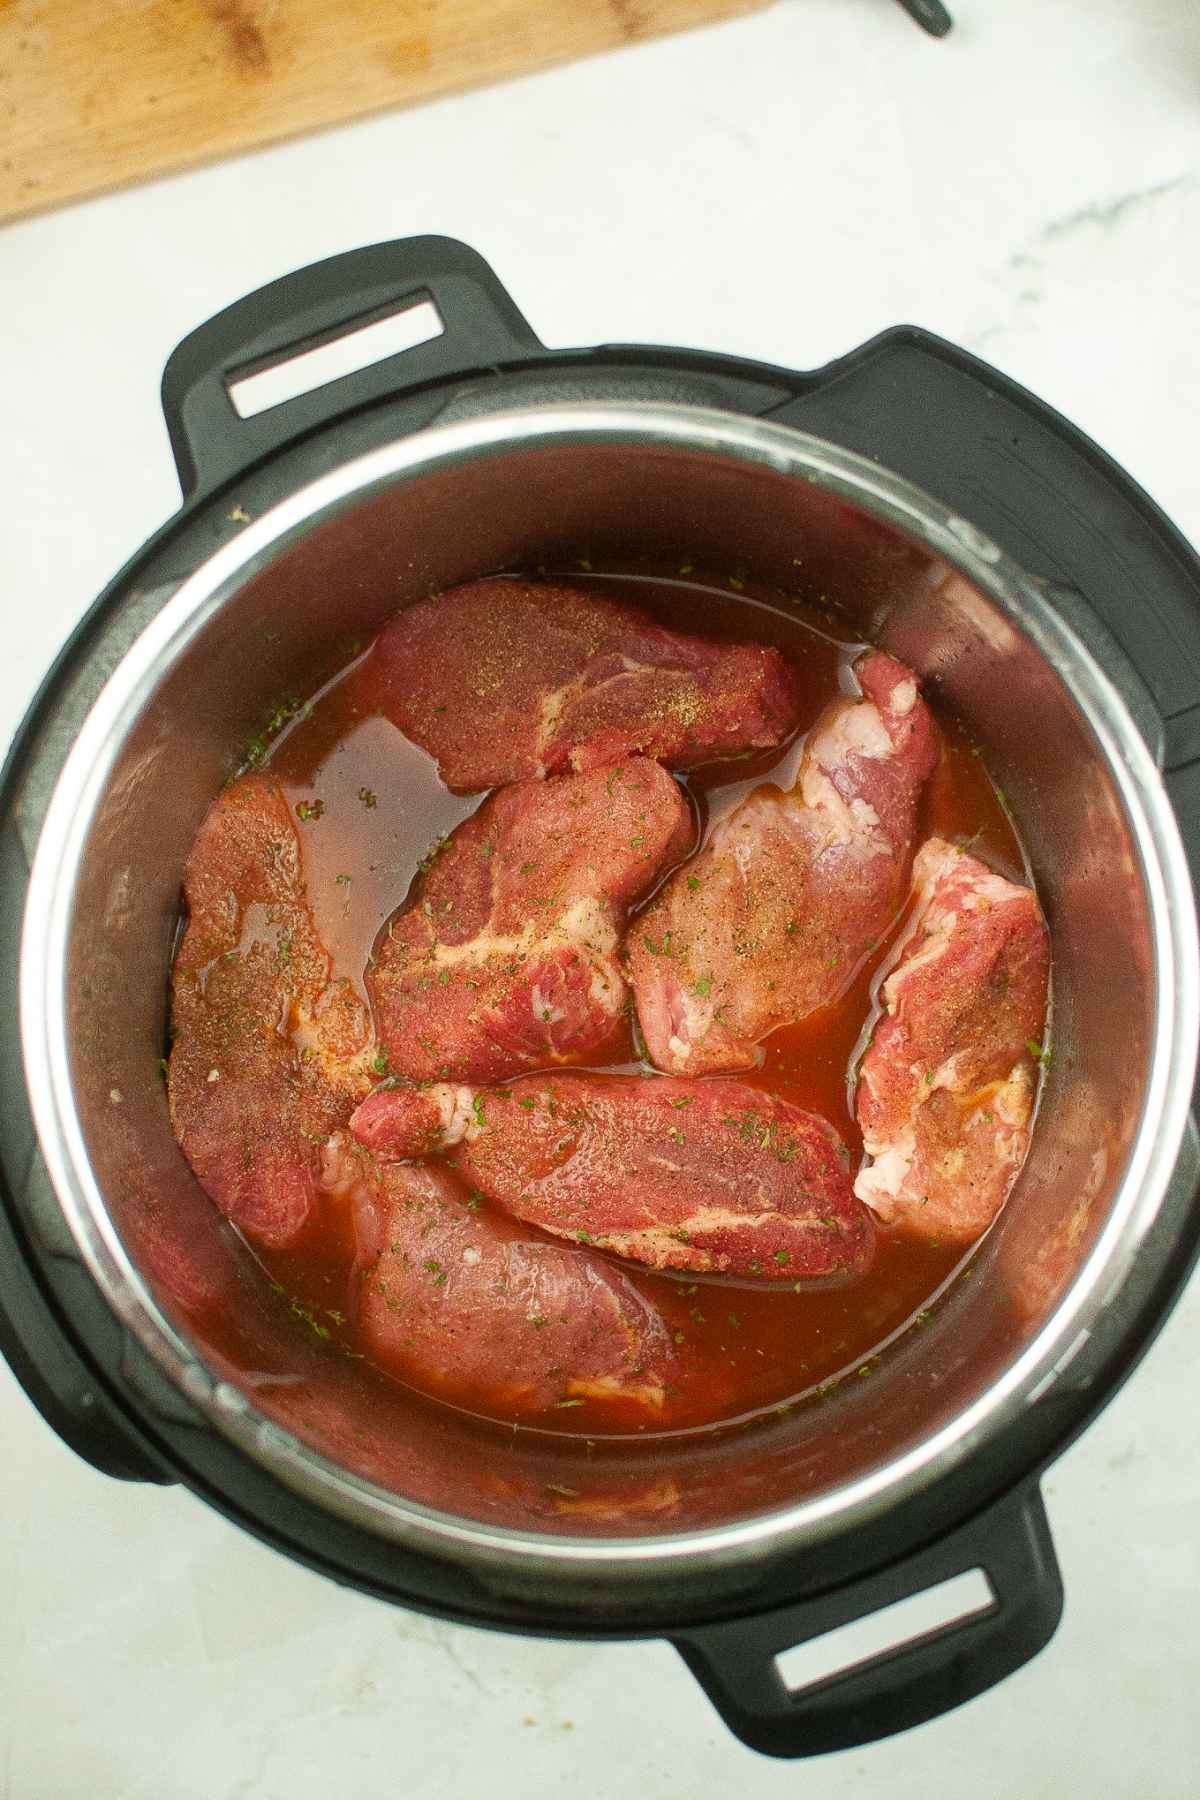 Raw meat in broth in an instant pot.